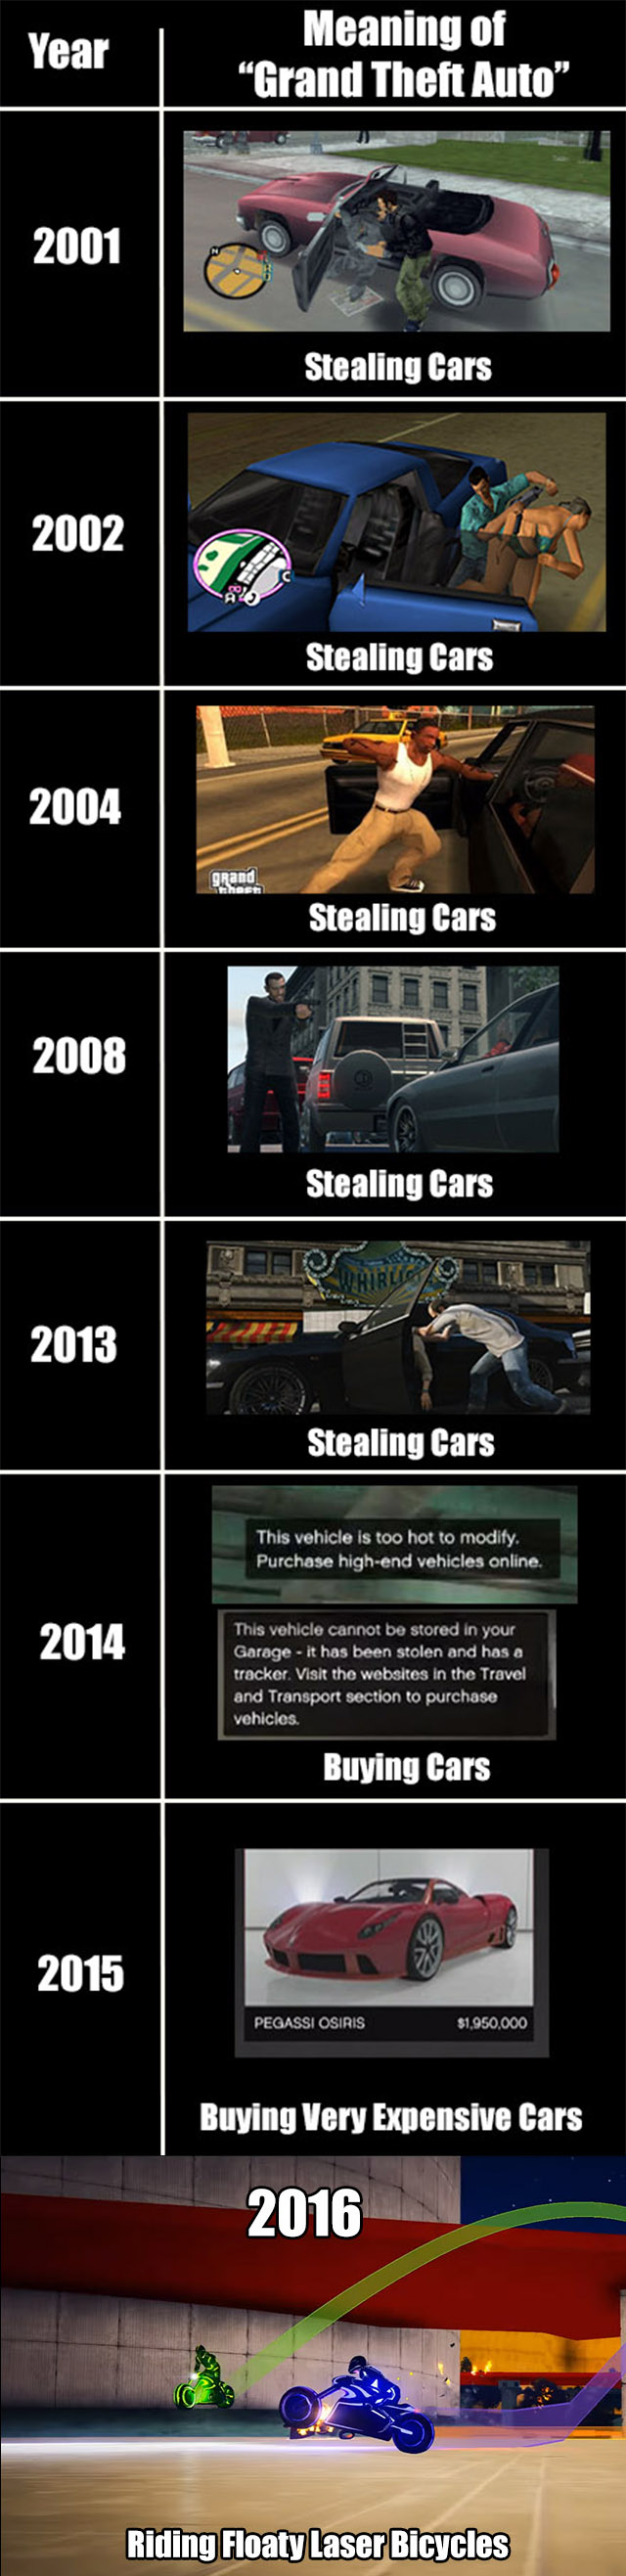 does grand theft auto mean - Year Meaning of Grand Theft Auto" 2001 Stealing Cars 2002 Stealing Cars 2004 grand Stealing Cars 2008 El Stealing Cars Trlig 2013 Stealing Cars This vehicle is too hot to modify. Purchase highend vehicles online 2014 This vehi